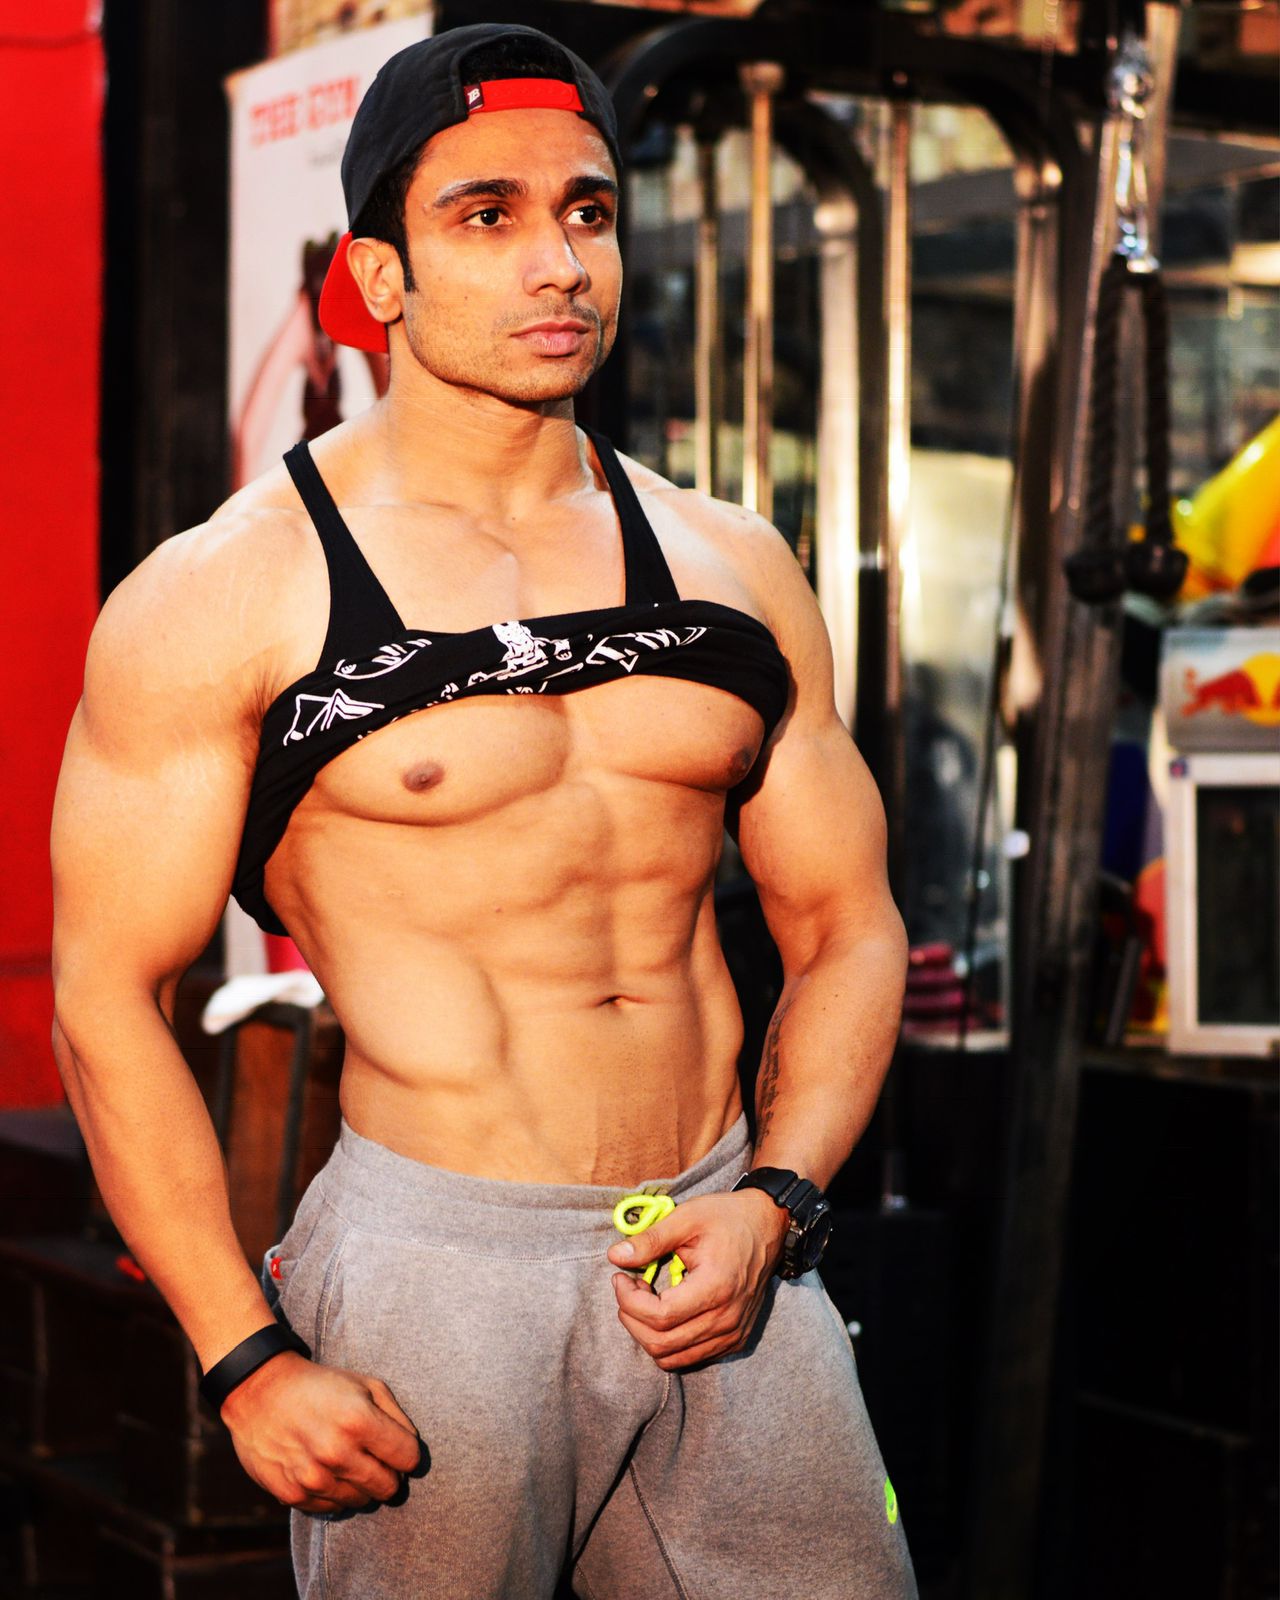 Vaibhav Chauhan - Fitness Trainer: Empowering Women Through Fitness and Self-Discovery